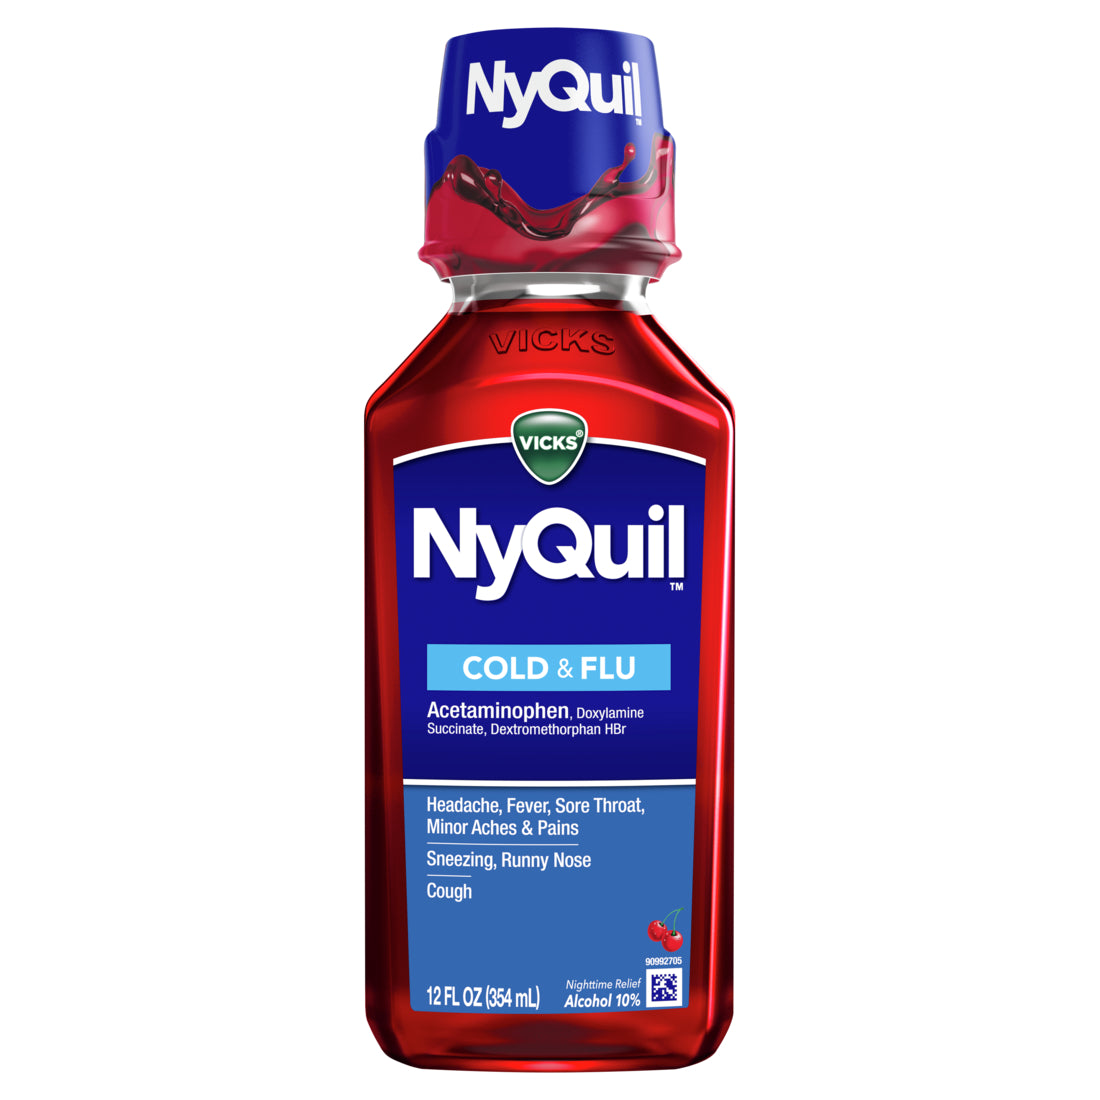 Vicks NyQuil Cherry Cold and Flu Relief Liquid Medicine Cherry Flavored - 12oz/12pk